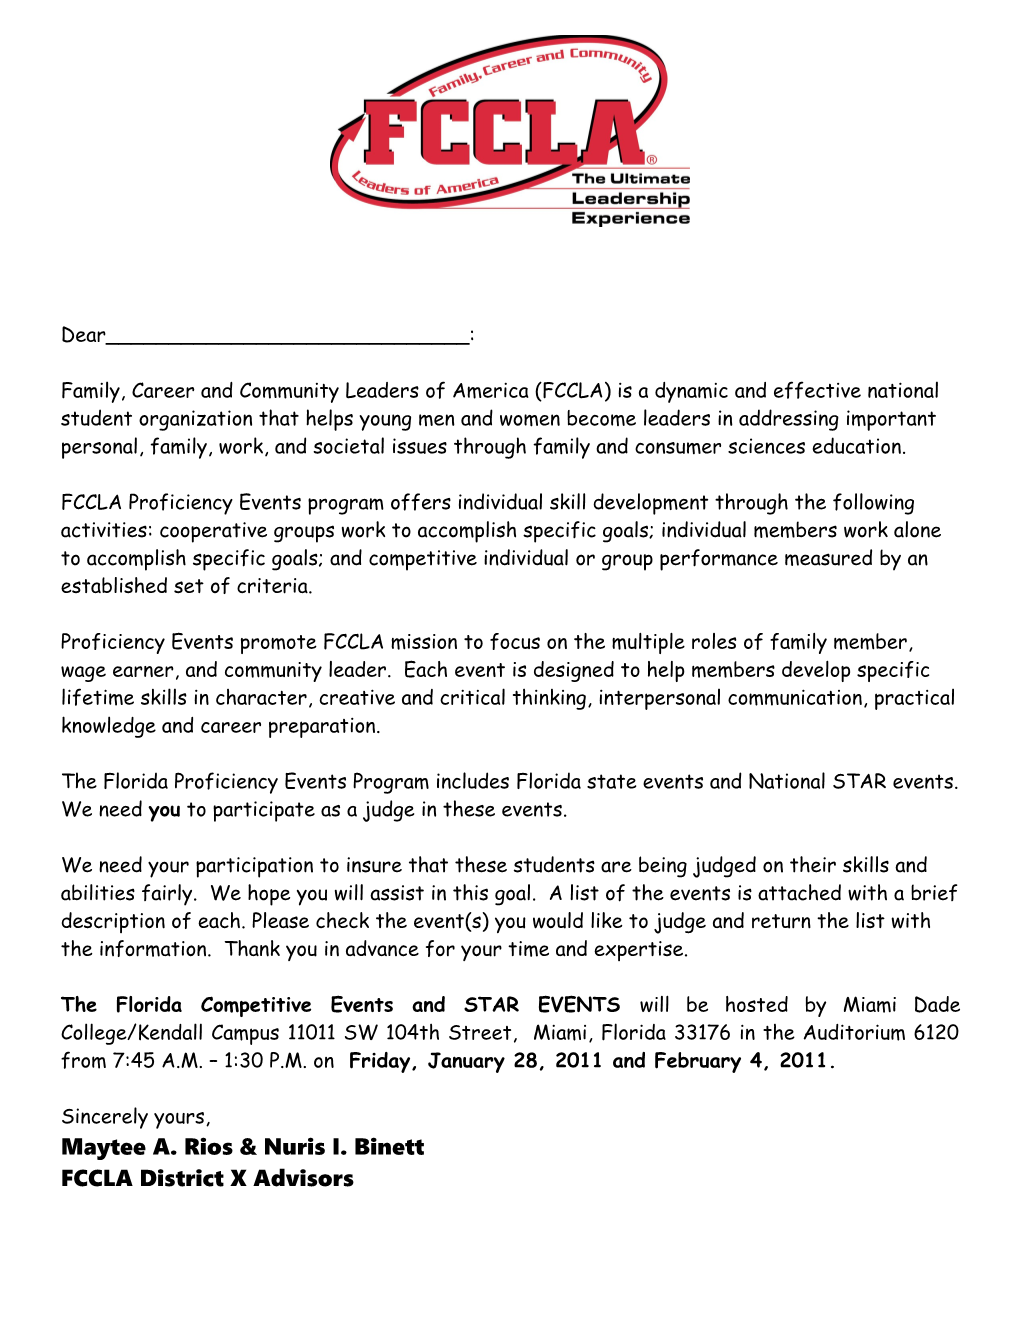 Family, Career and Community Leaders of America (FCCLA) Is a Dynamic and Effective National